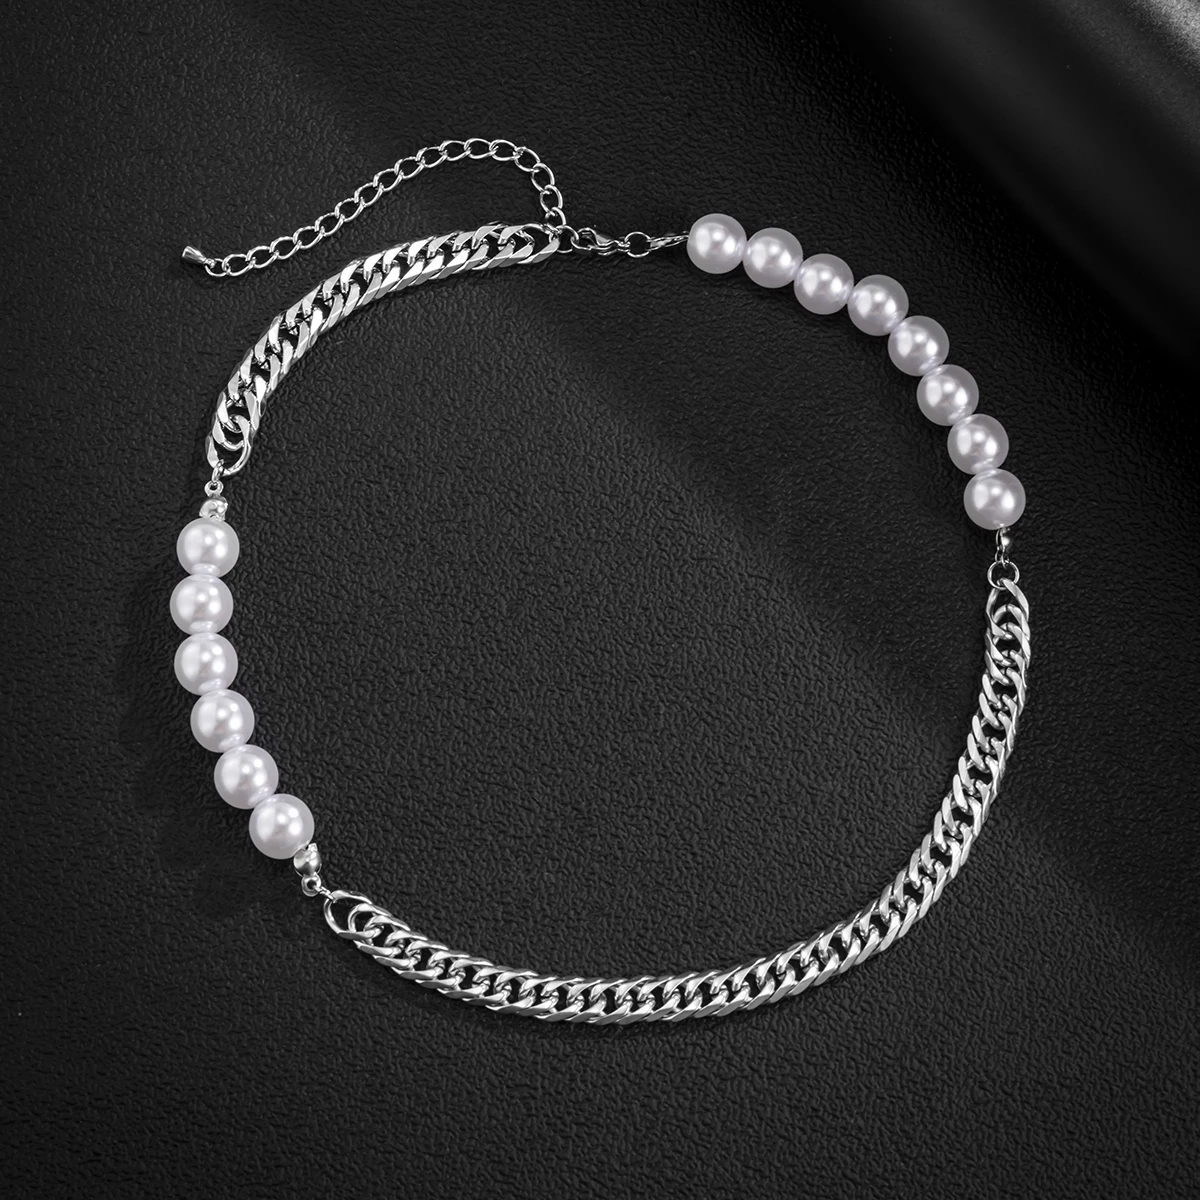 

KunJoe Simple Punk Pearl Chain Choker Necklace For Women Asymmetric Clavicle Chain Short Necklace 2021 Trend Jewelry Wholesale